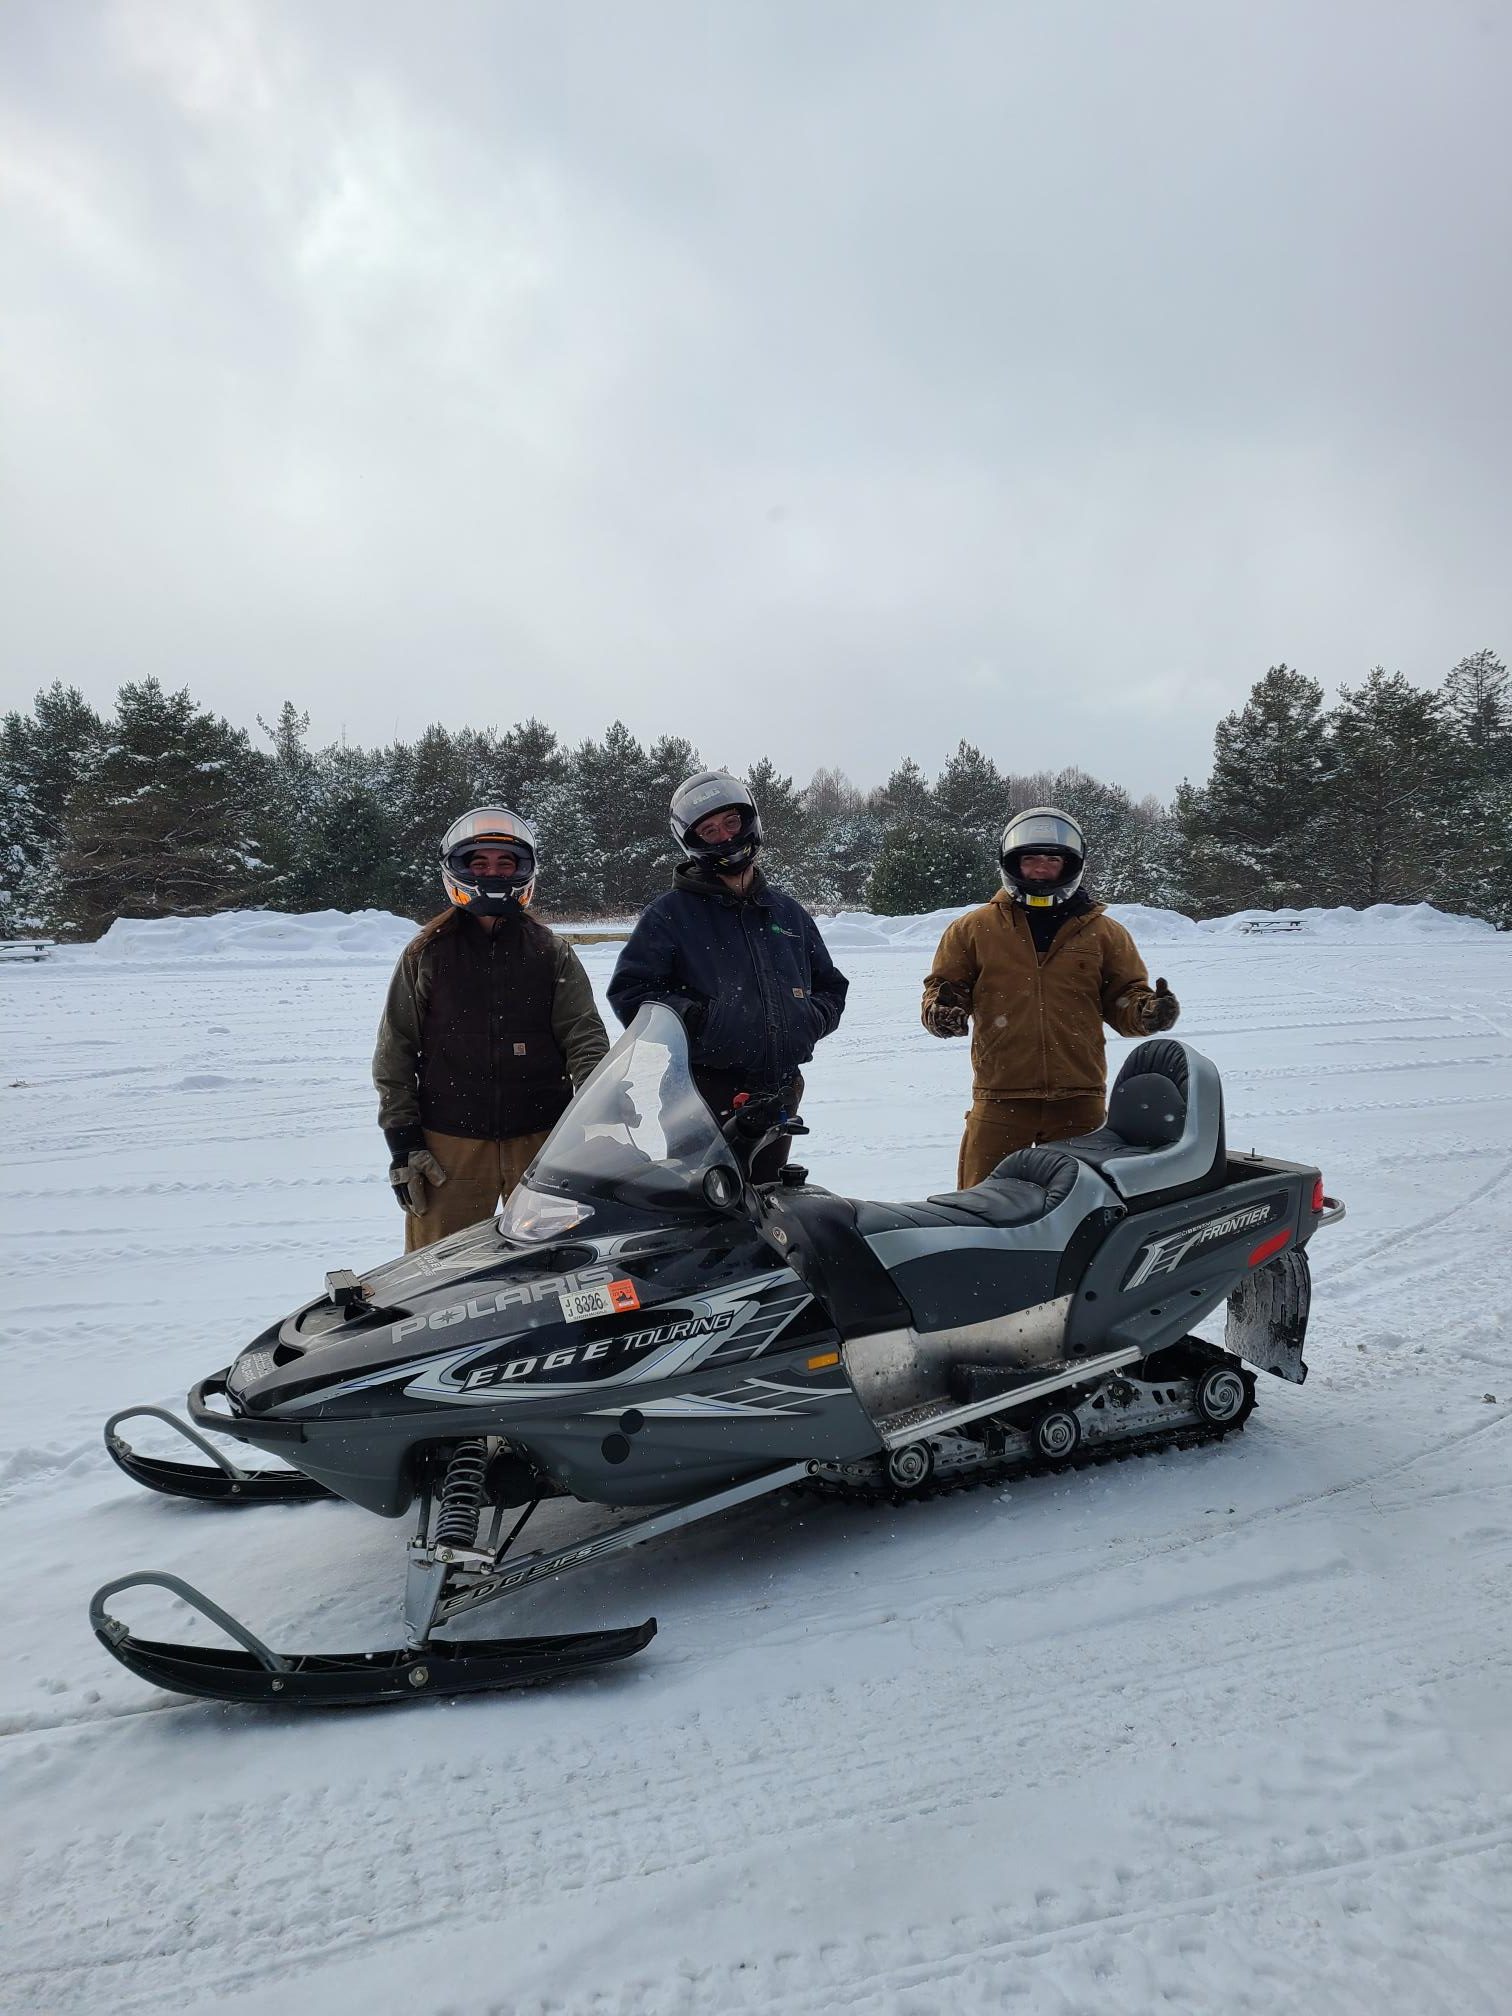 snowmobile with 3 people standing behind in helmets and winter gear